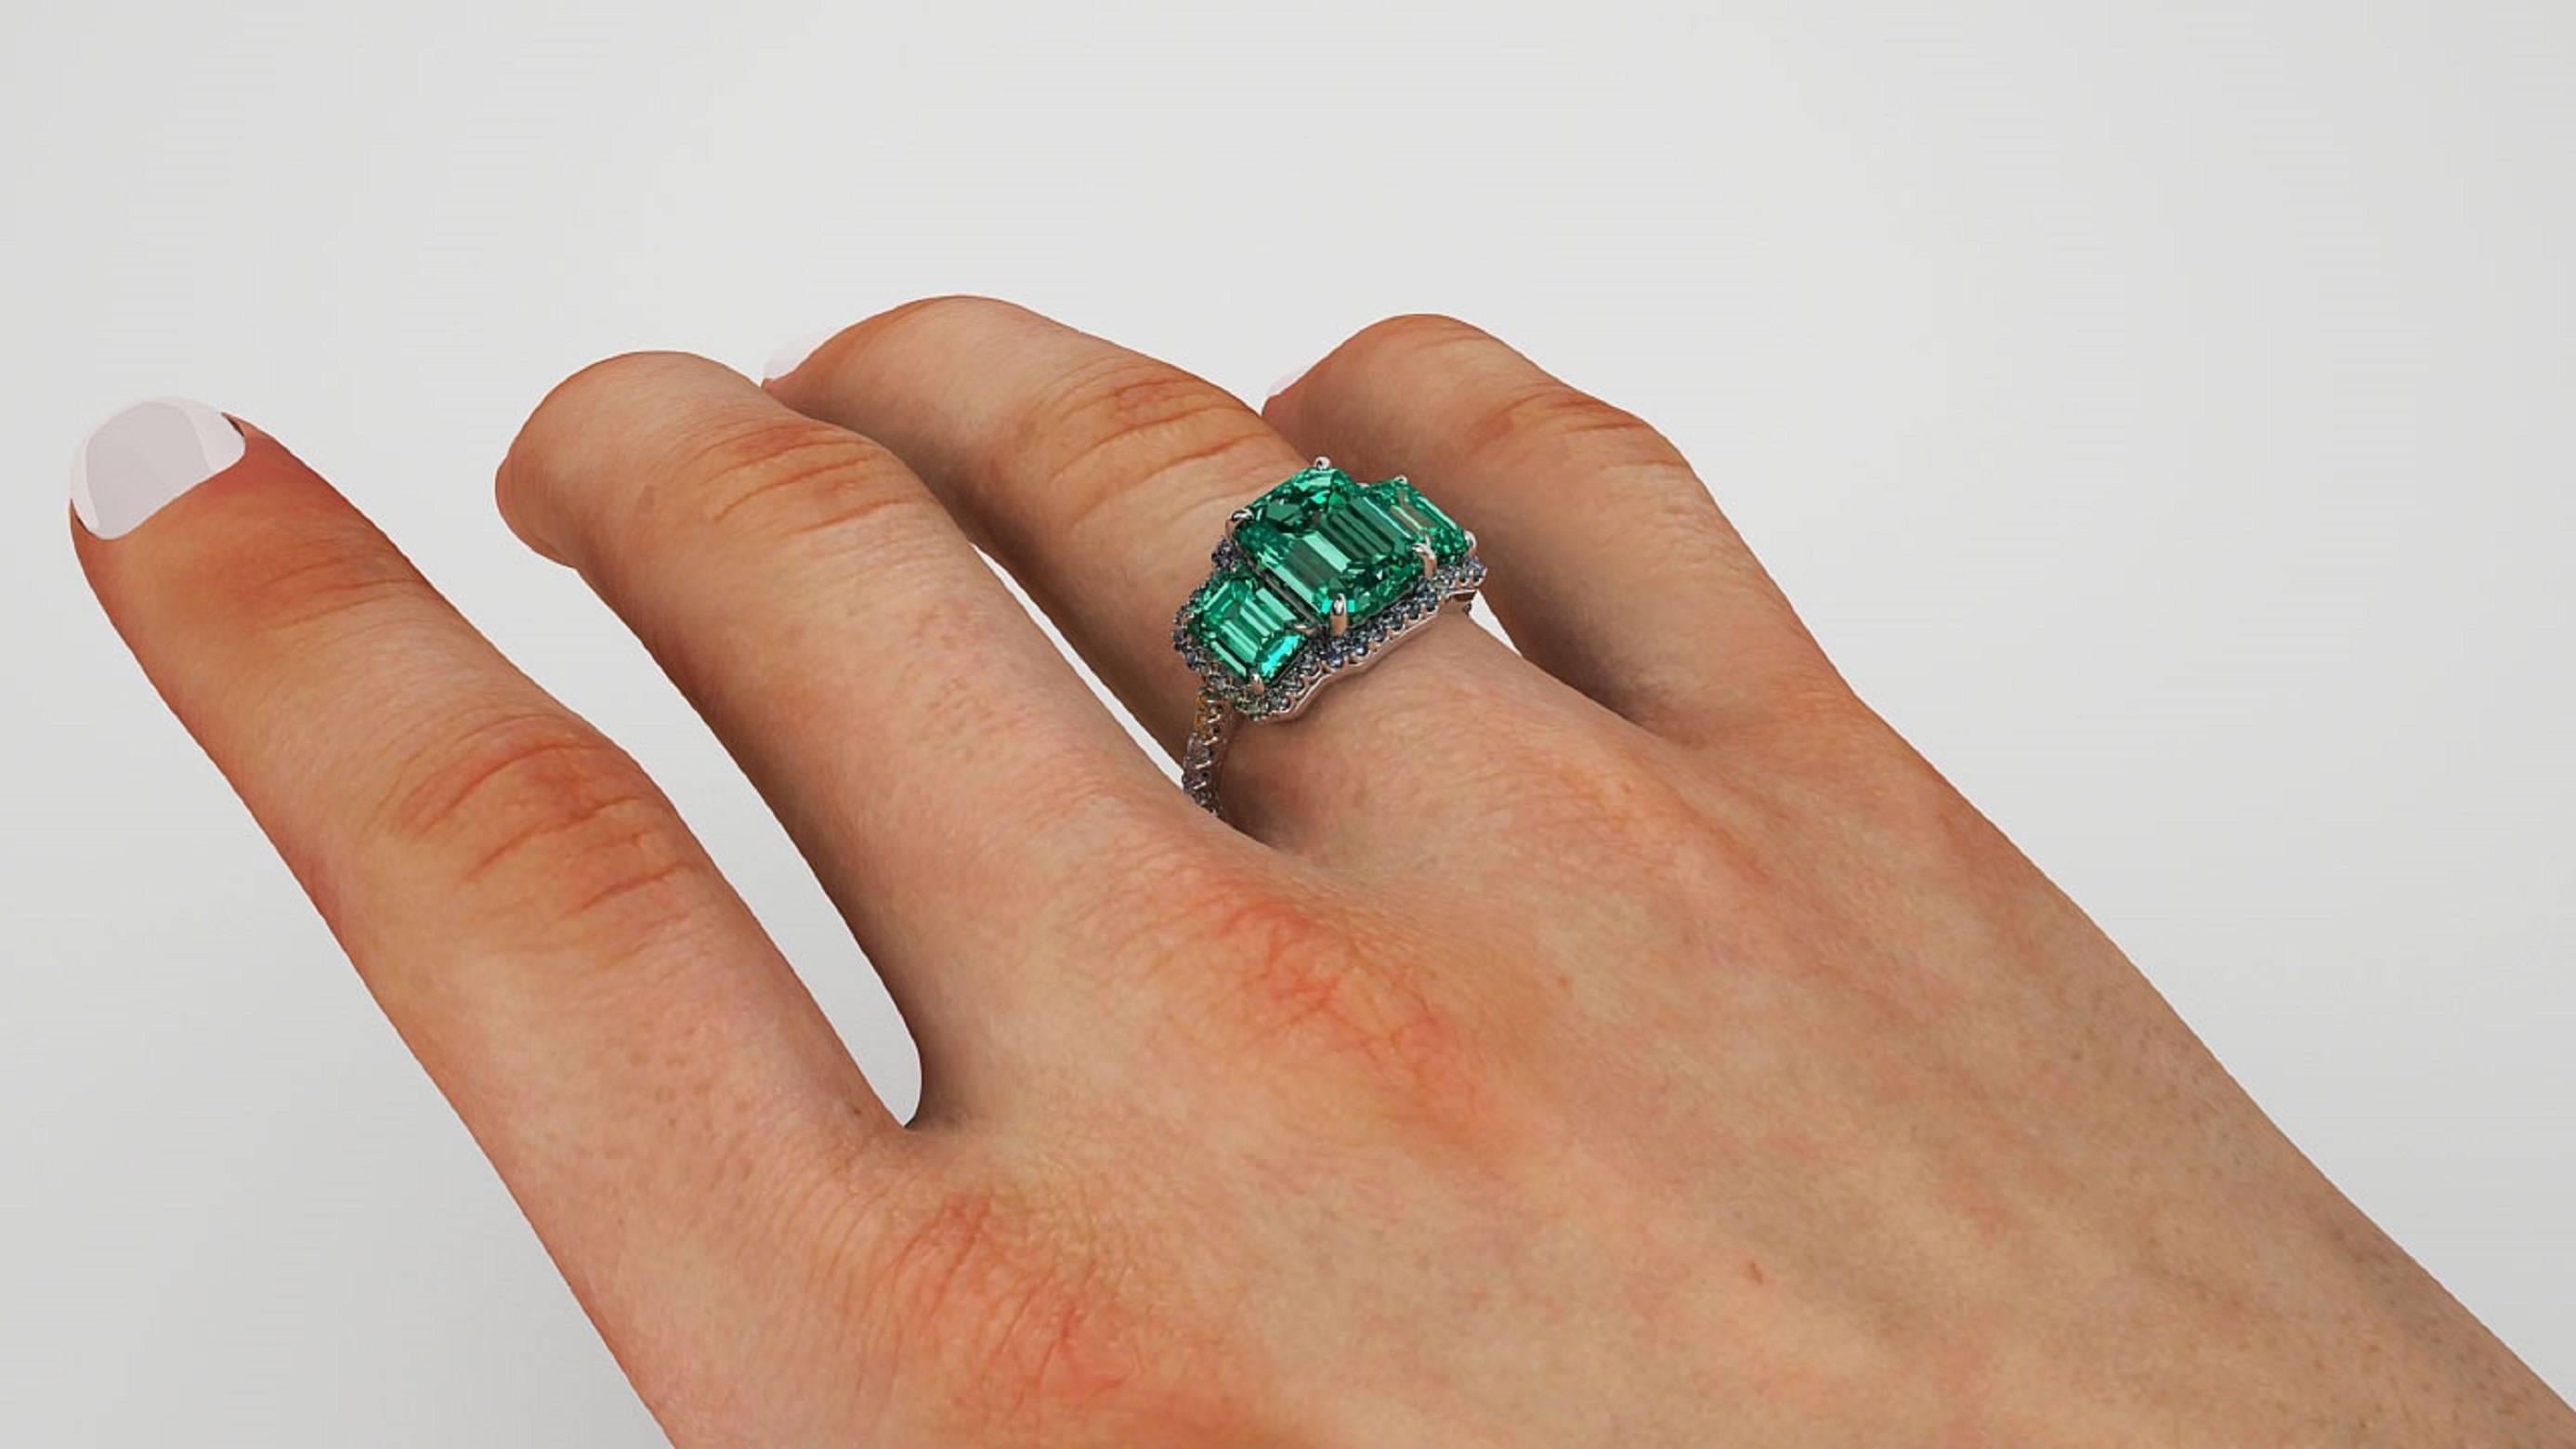 Made in Platinum, excellent deep green Emeralds.All sizes available. WIll be accompanied with an appraisal from an outside well established lab GAL accepted by your insurance with the details, and retail value. 